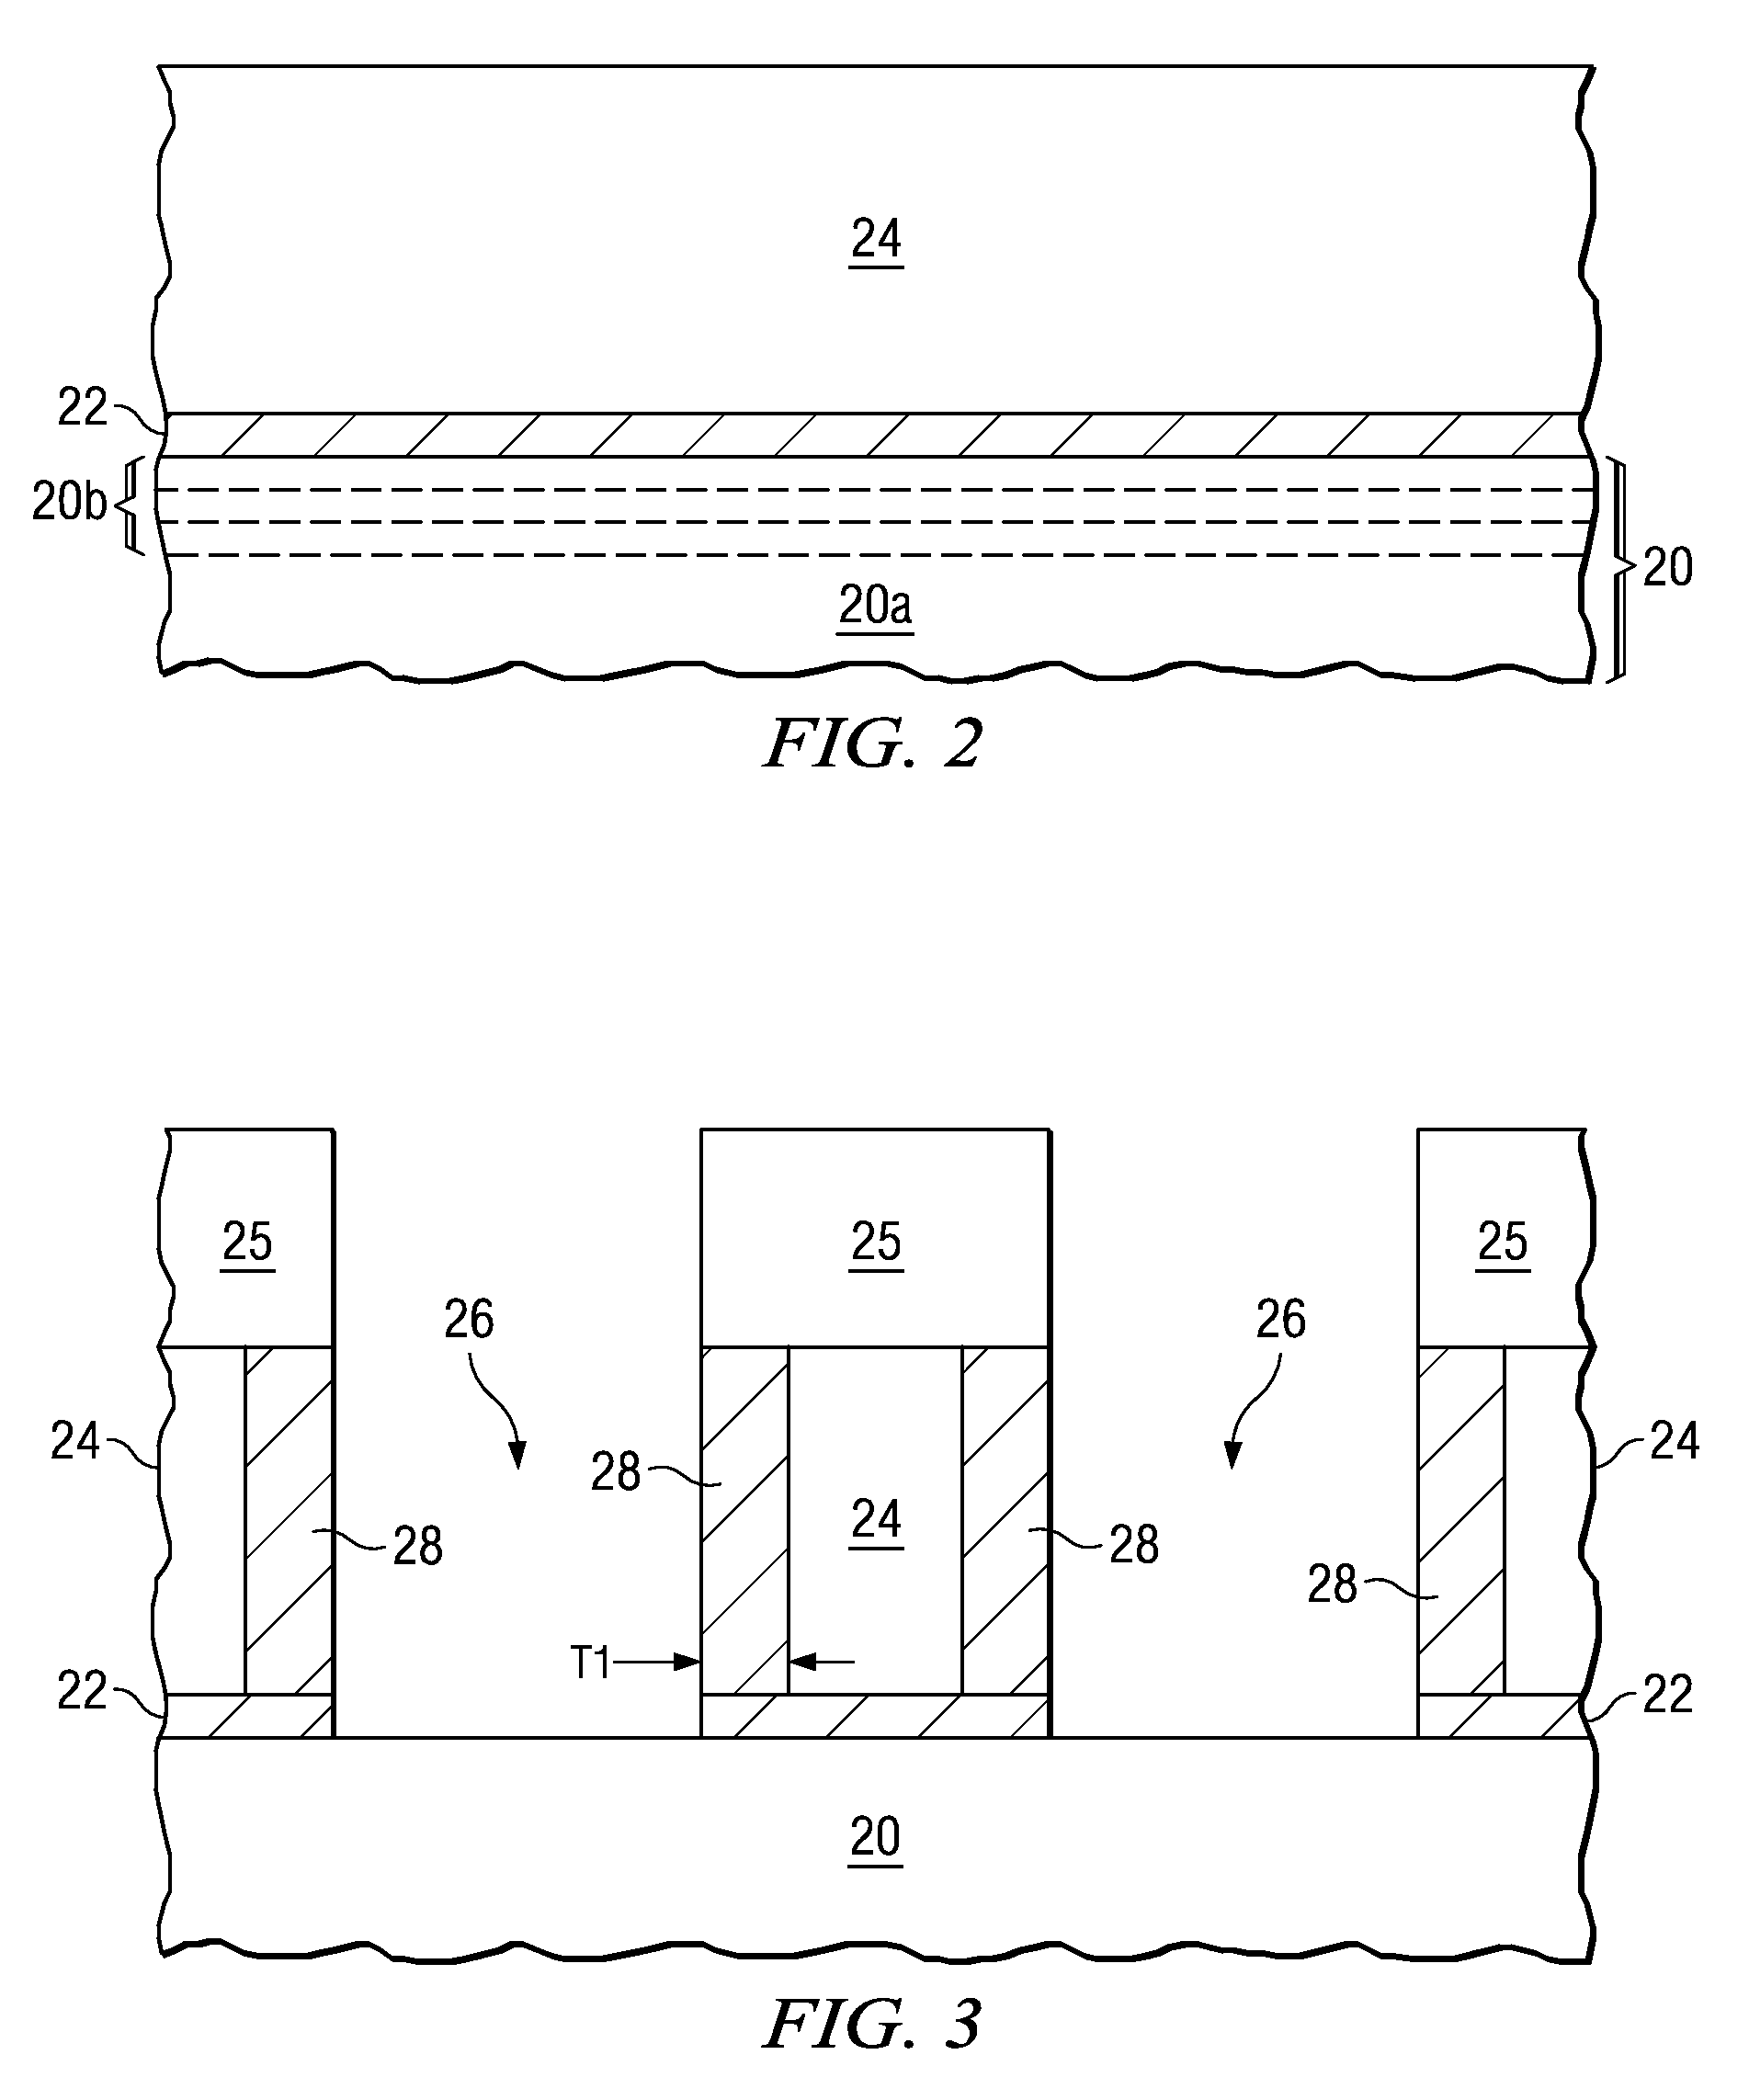 Solving via-misalignment issues in interconnect structures having air-gaps